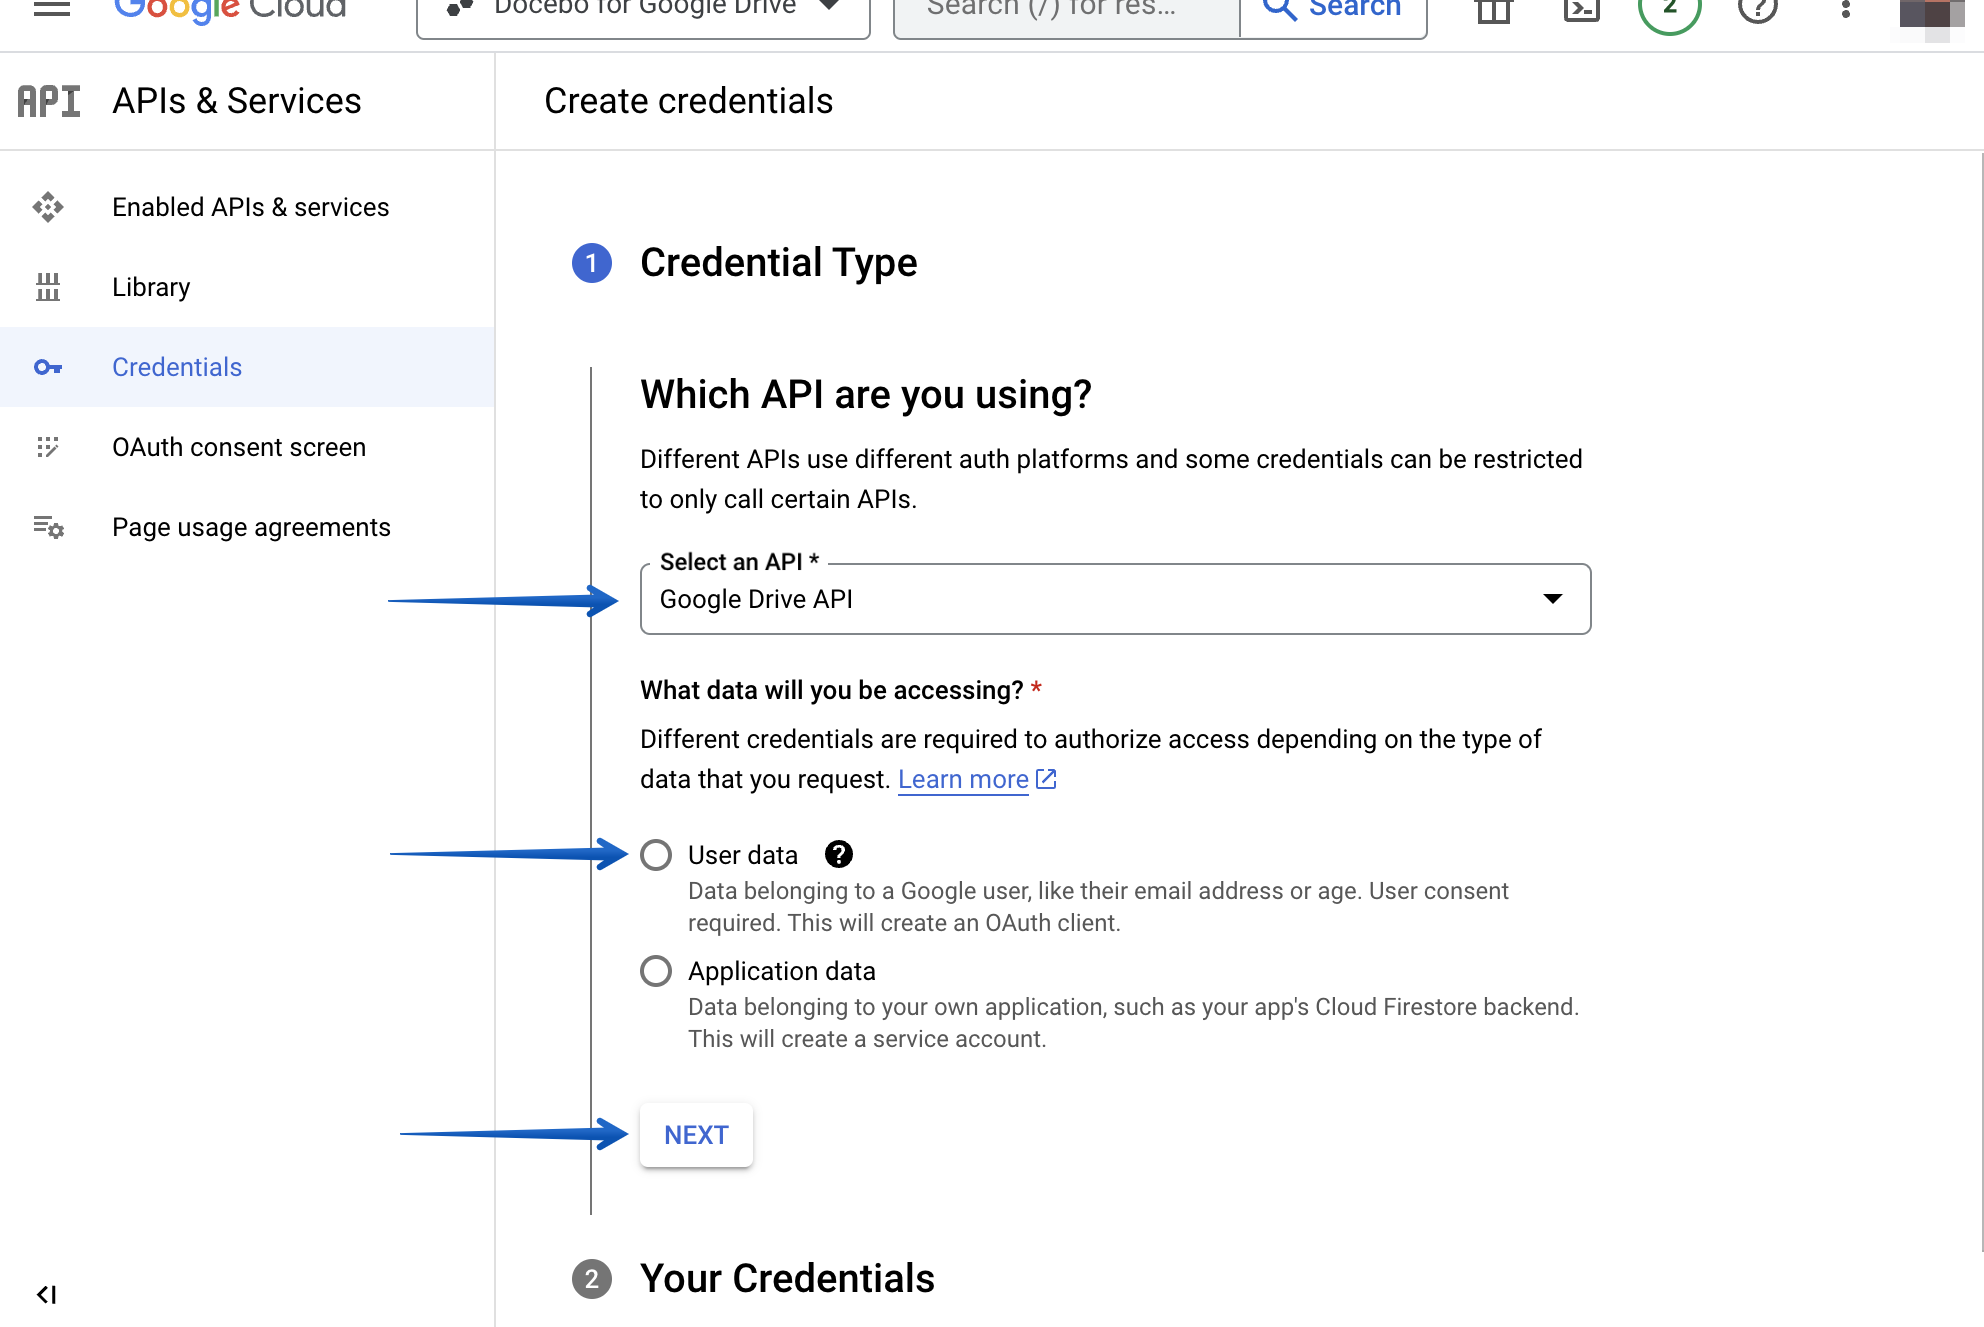 Creating credentials, selecting the type of API and data used